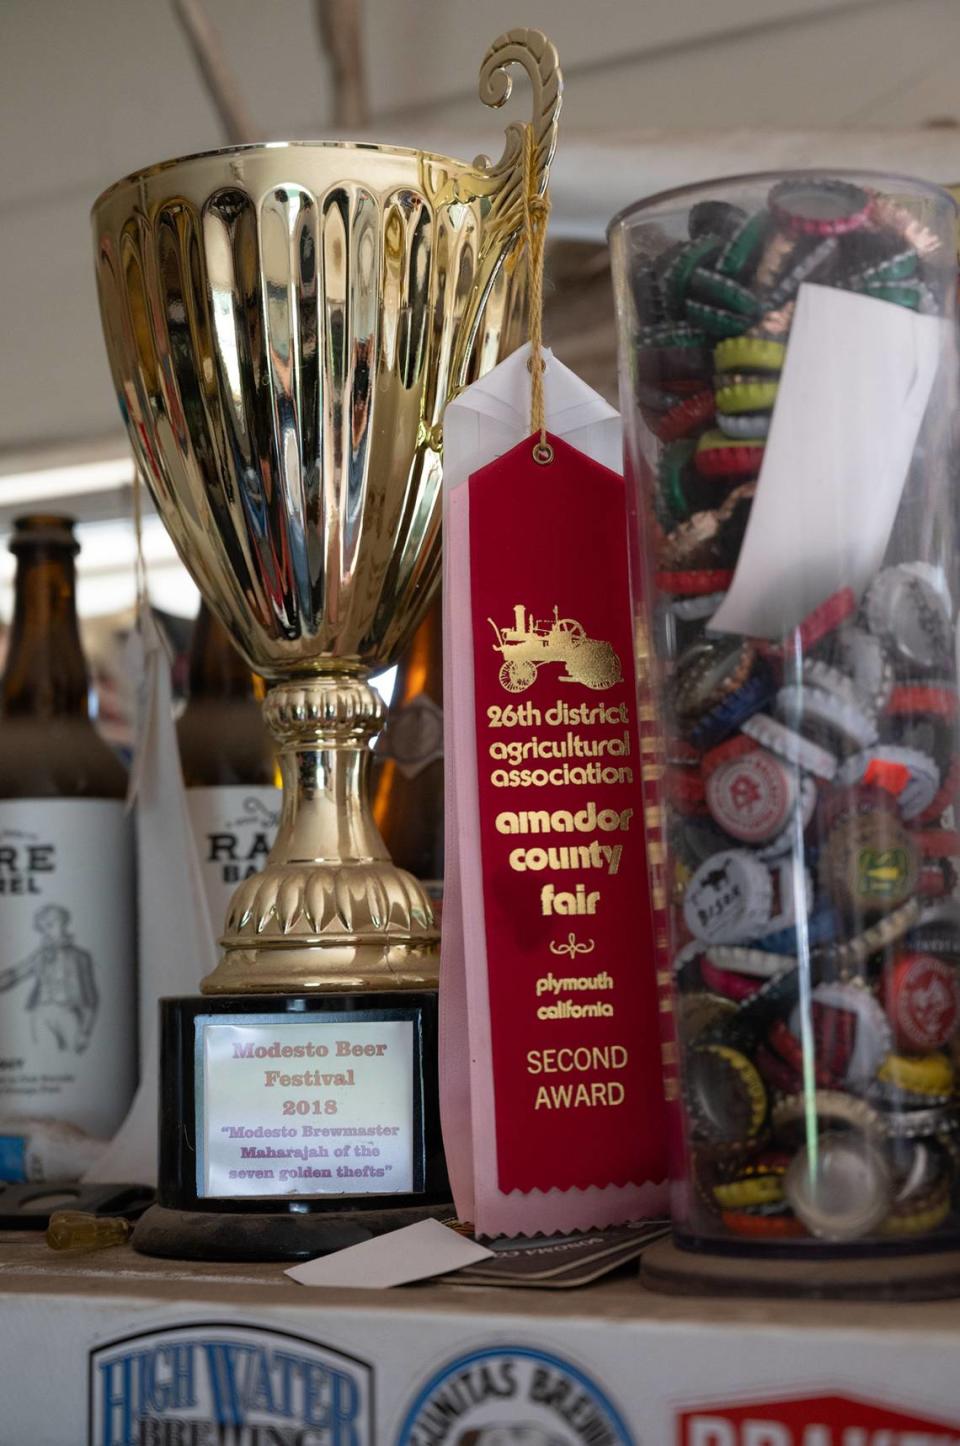 Henry VanderWeide III has won a few awards with his home-brewed beer. Photographed at his home in Ripon, Calif., Friday, August 18, 2023. Andy Alfaro/aalfaro@modbee.com